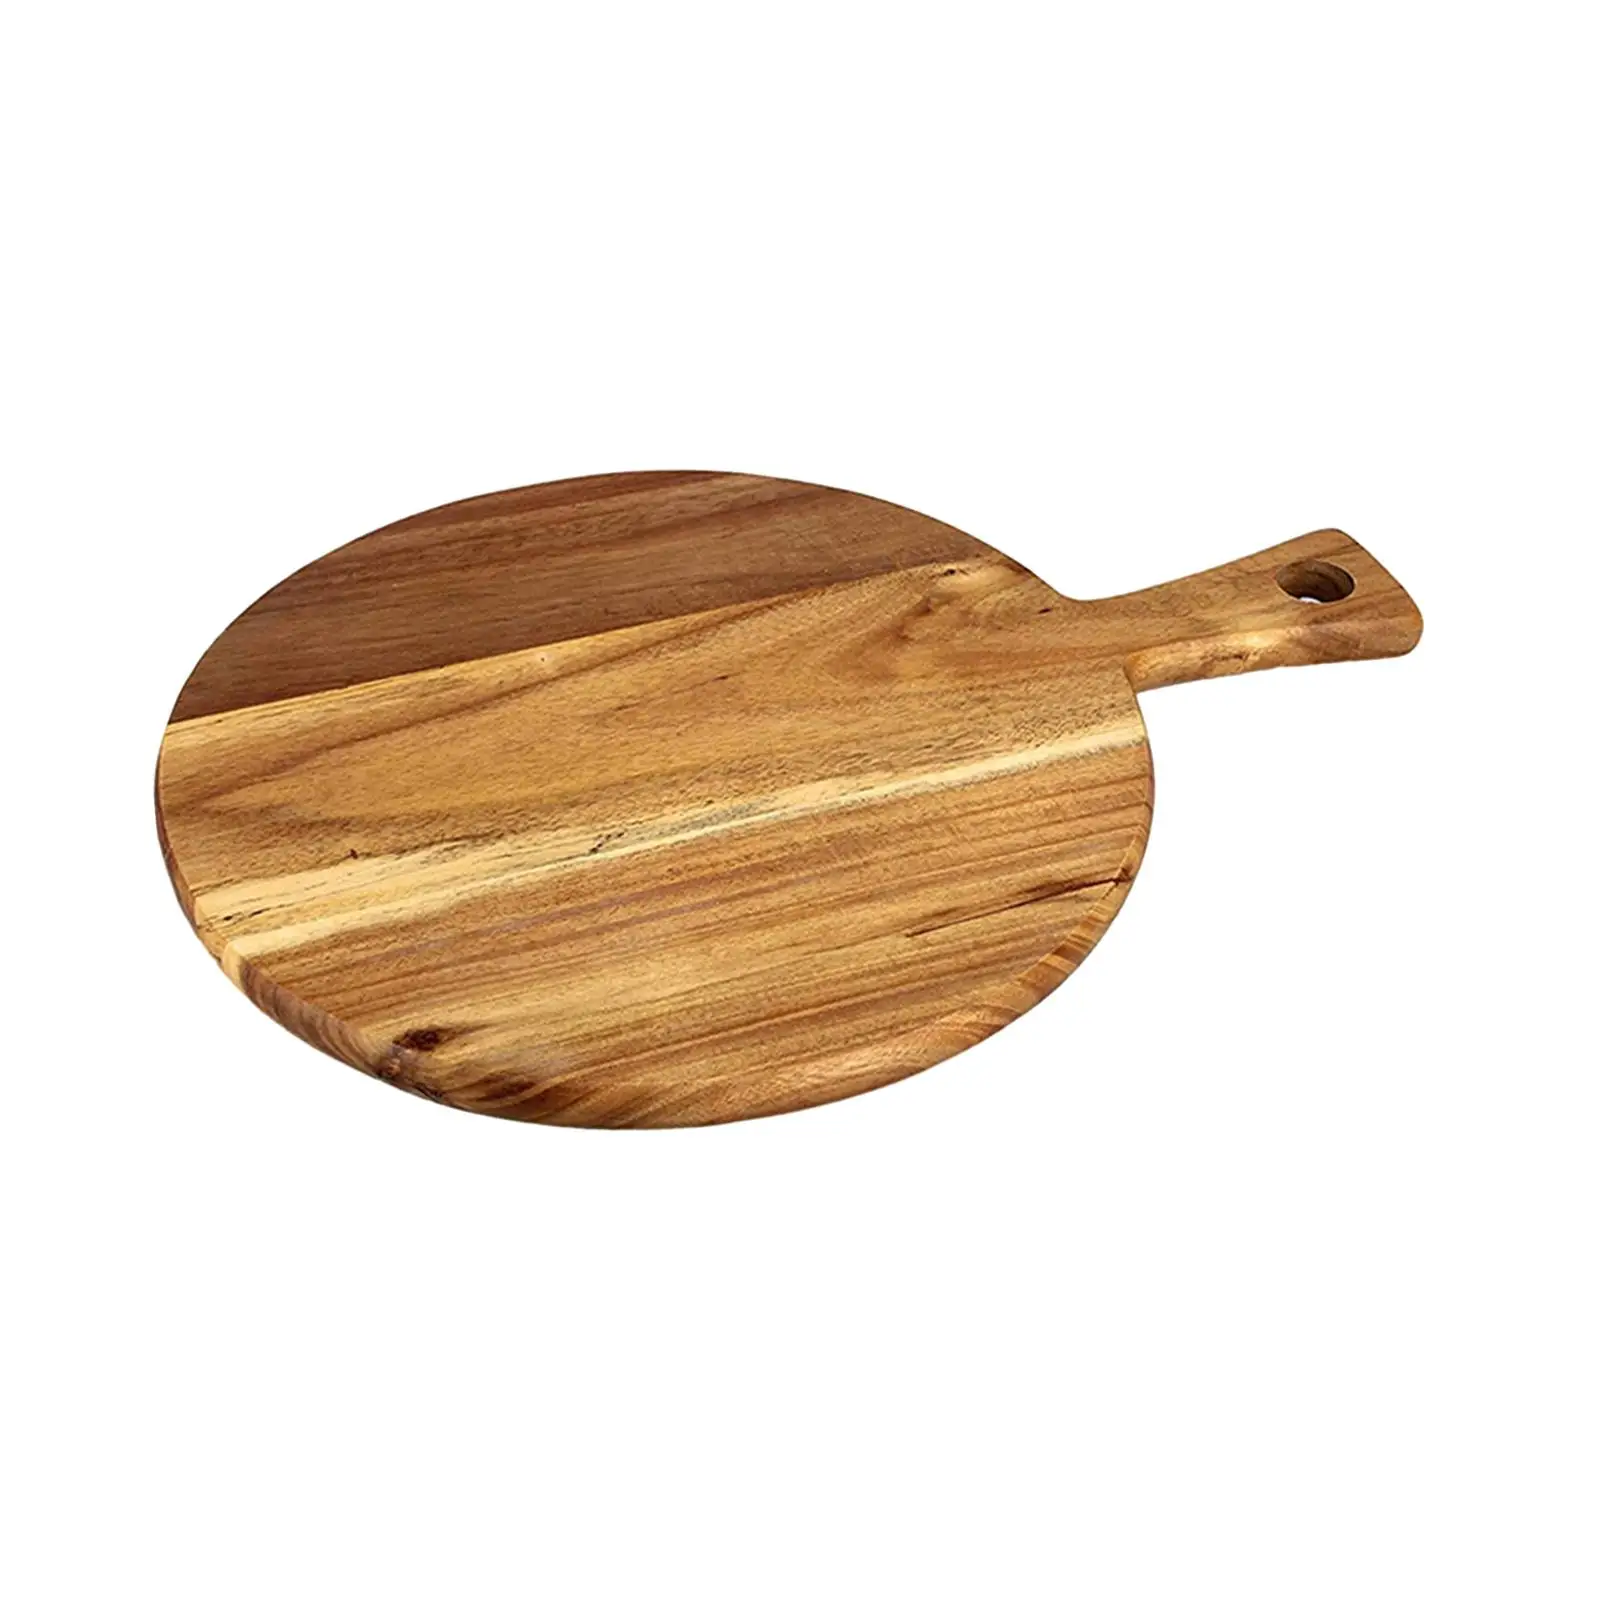 Wood Pizza Peel for Cheese Bread Fruit Sturdy Multipurpose Homemade Ergonomic Oven Accessories Chopping Board Cutting Board